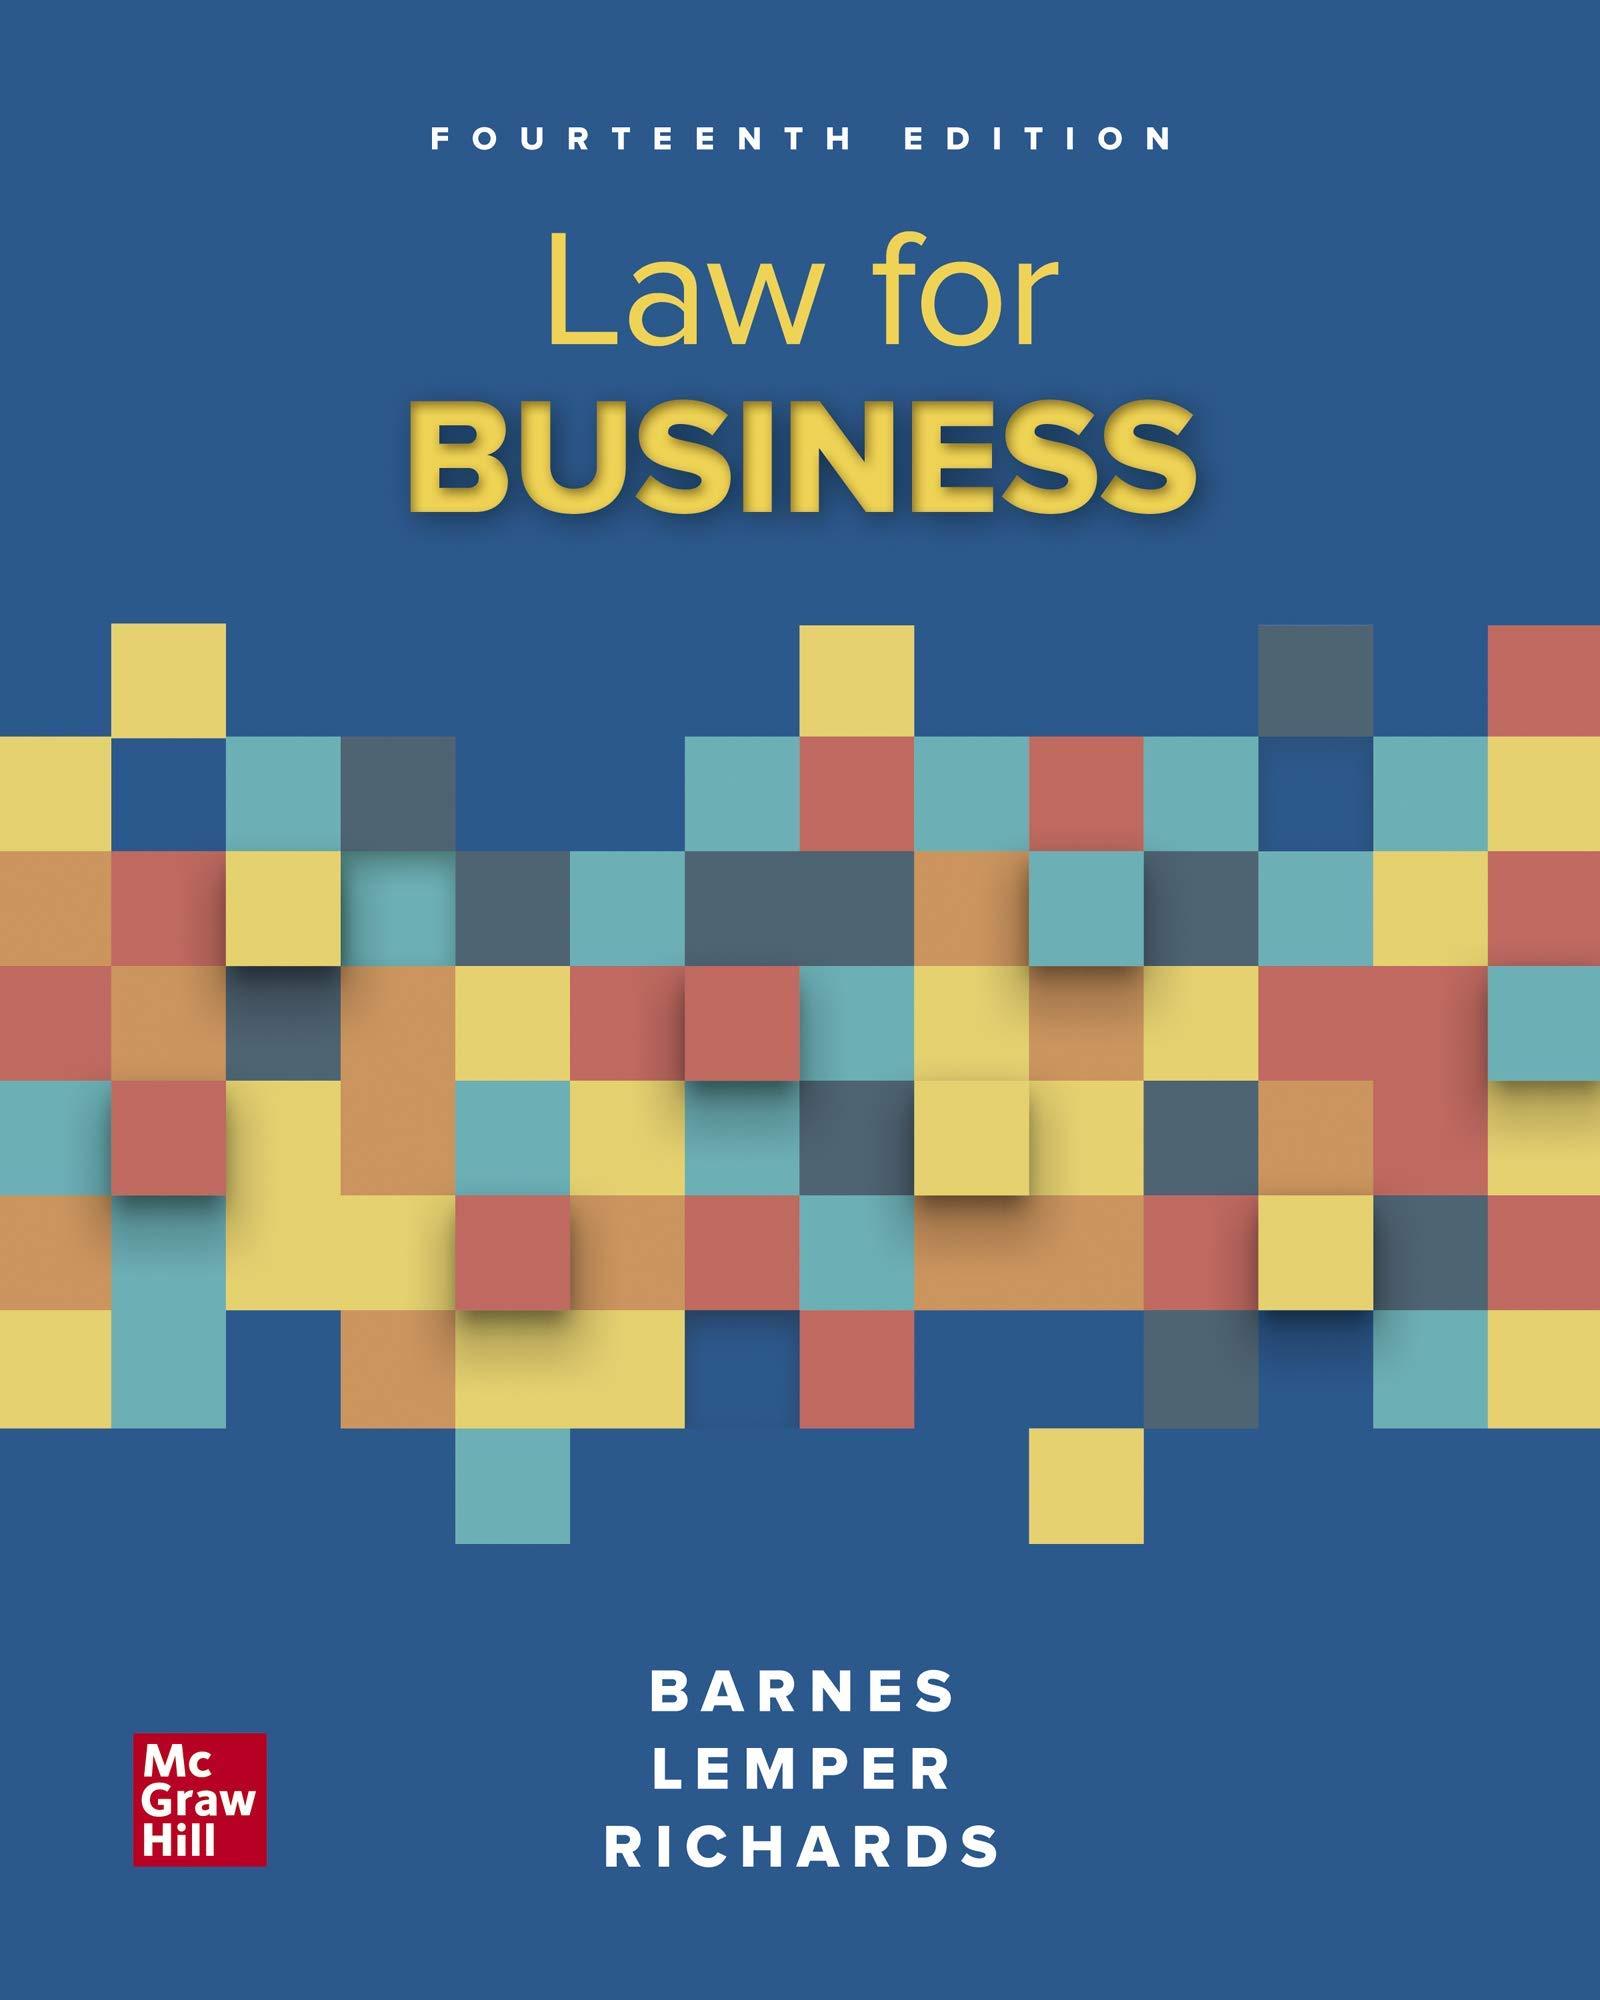 law for business 14th edition a. james barnes, eric richards, tim lemper 1260247767, 9781260247763